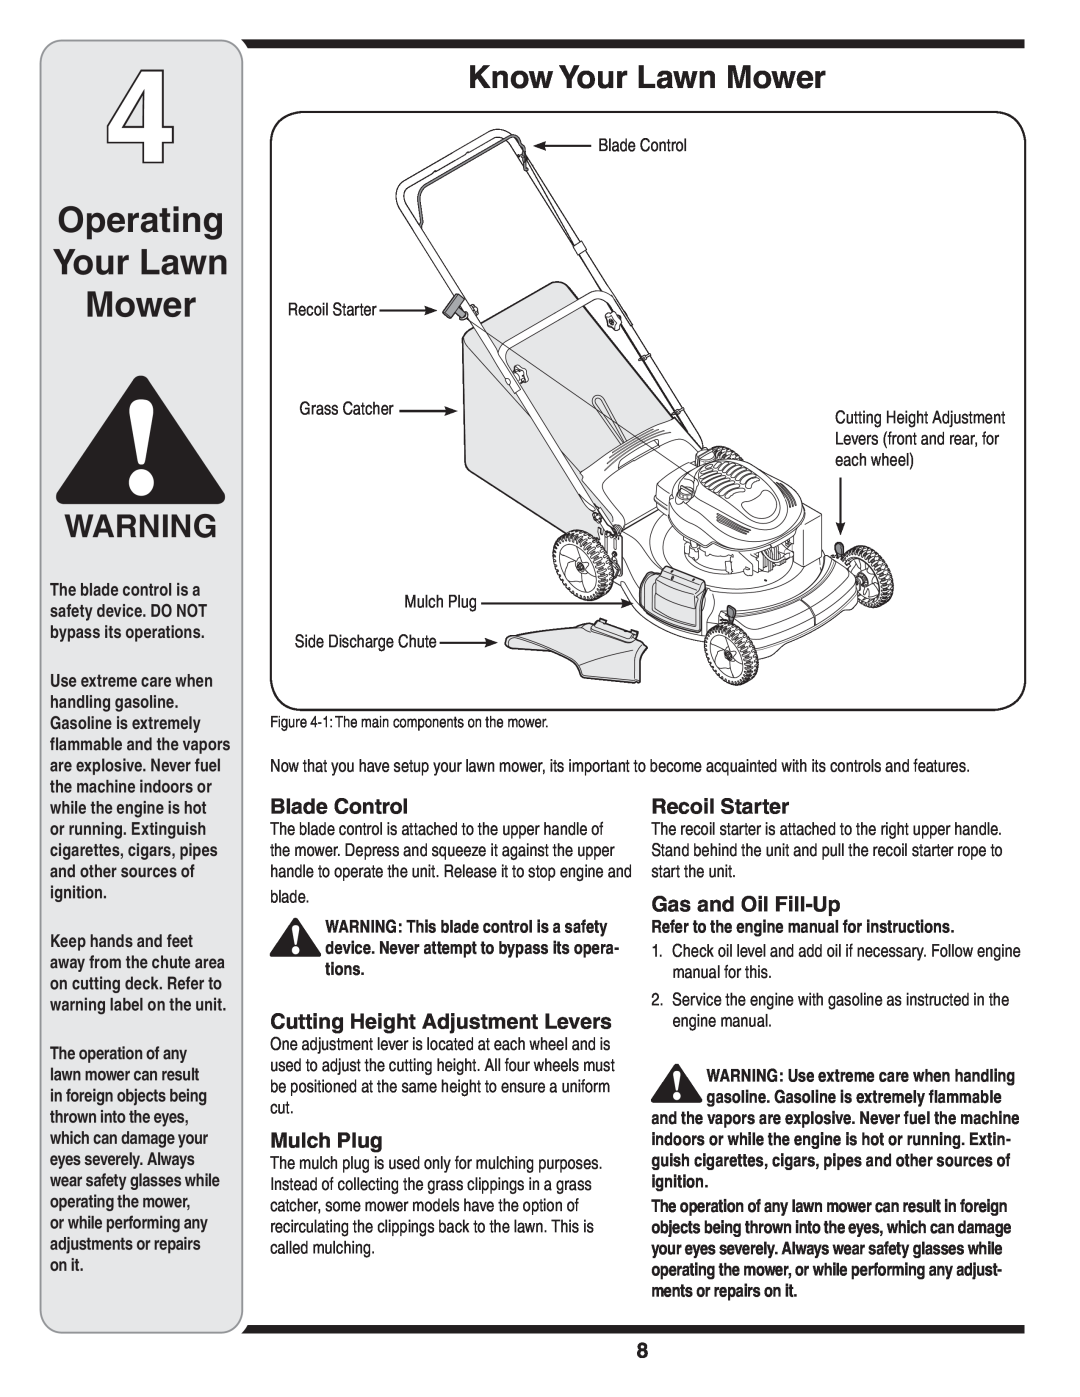 Yard-Man 430 warranty Operating Your Lawn Mower, Know Your Lawn Mower, Refer to the engine manual for instructions 